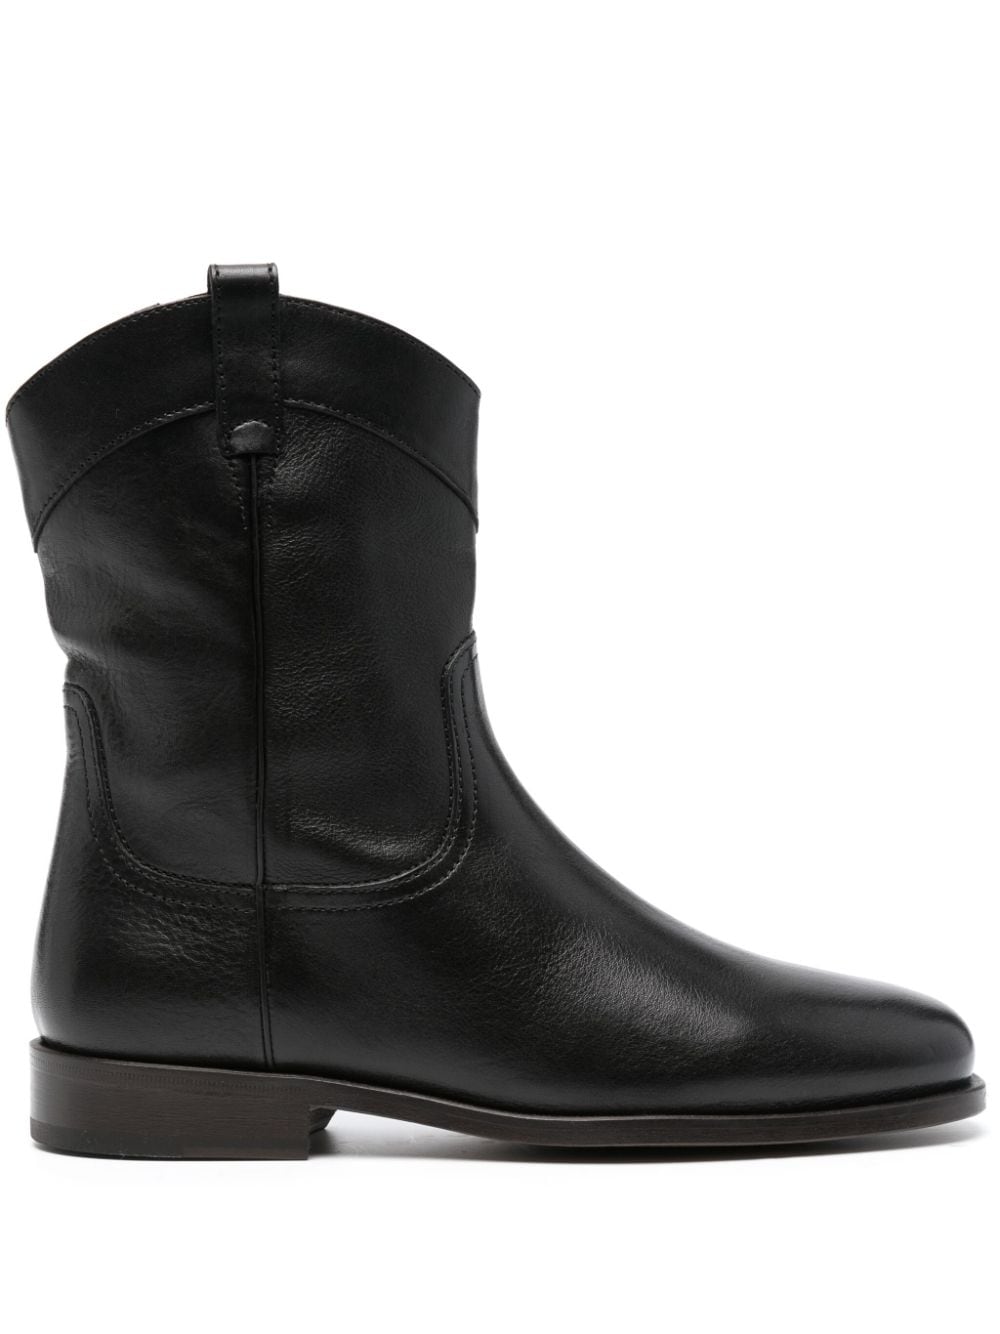 LEMAIRE Western-style Leather Boots - Farfetch